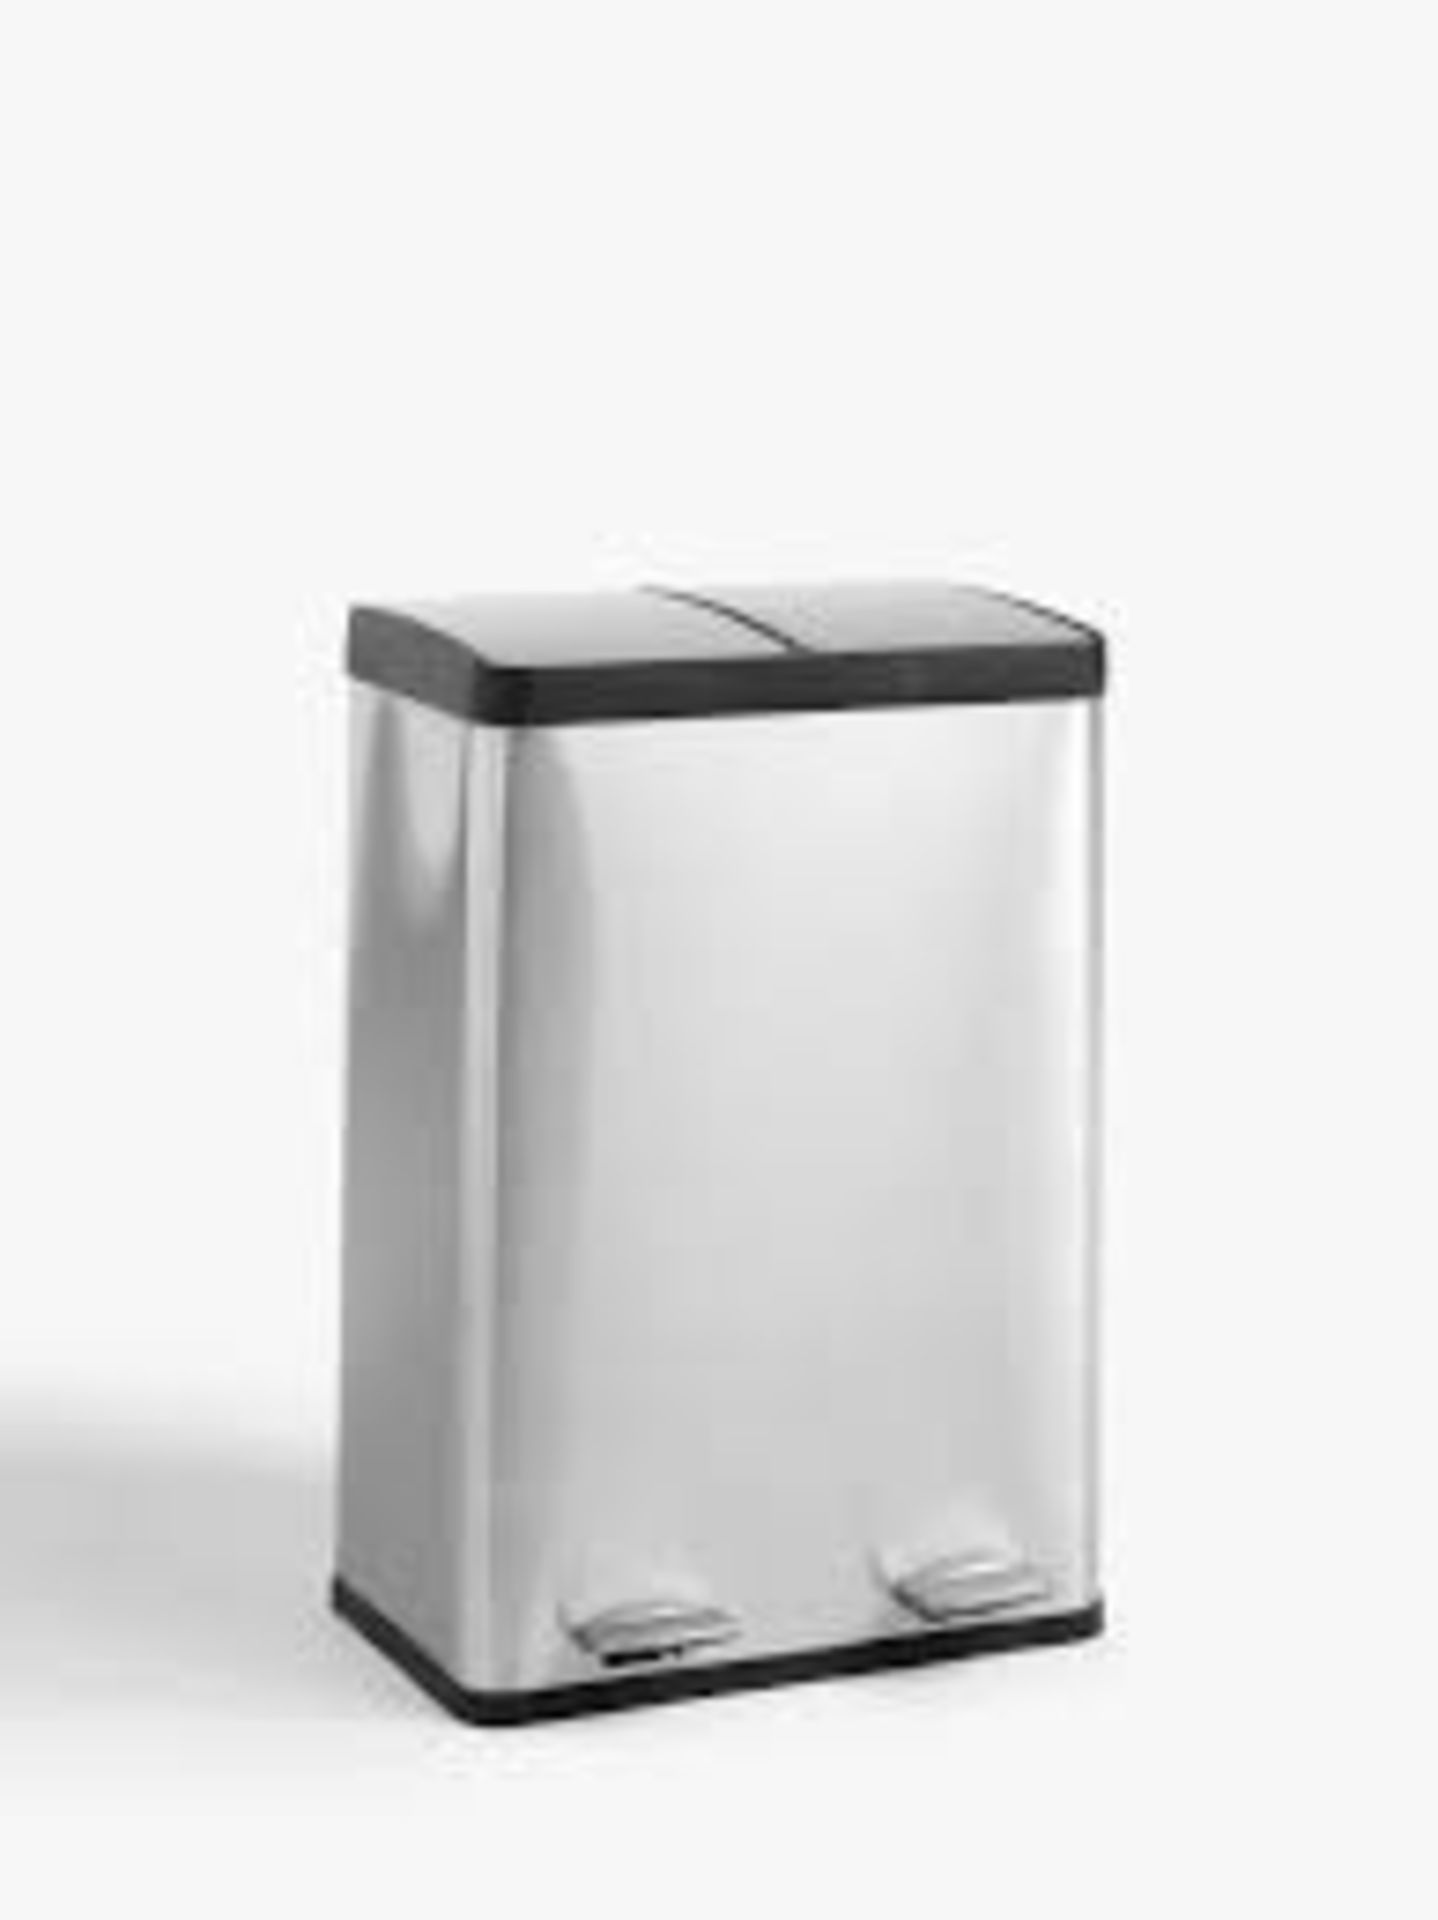 Boxed John Lewis & Partners 40 Litre Recycling Bin RRP £75 (NBW547338) (Pictures Are For